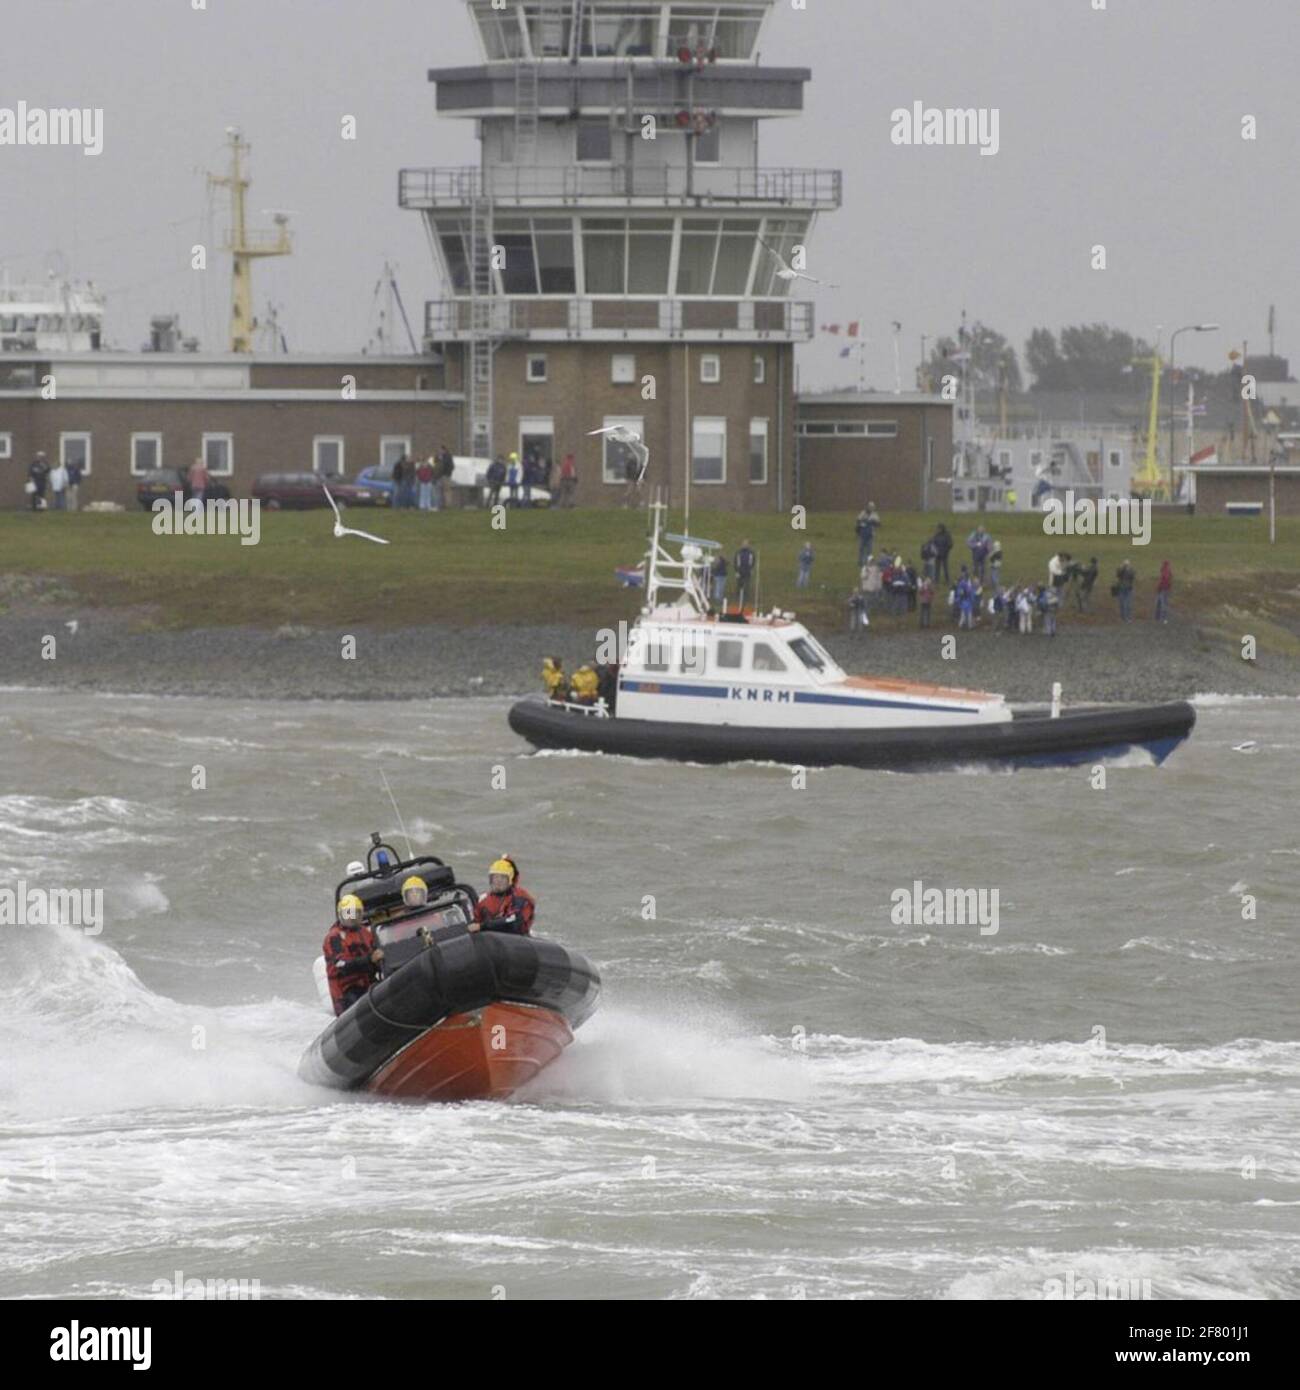 September 22, 2004, Den Helder © Jens Grijpstra / Royal Navy O 'Neill Sea Odyssey An educational journey for children on and around the sea. In collaboration with the Coast Guard, Royal Navy, Royal Rescue Society (KNRM), Rijkswaterstaat Please note that the description of this photo is the original description by the photographer. At a later stage this description will be revised if necessary. Stock Photo